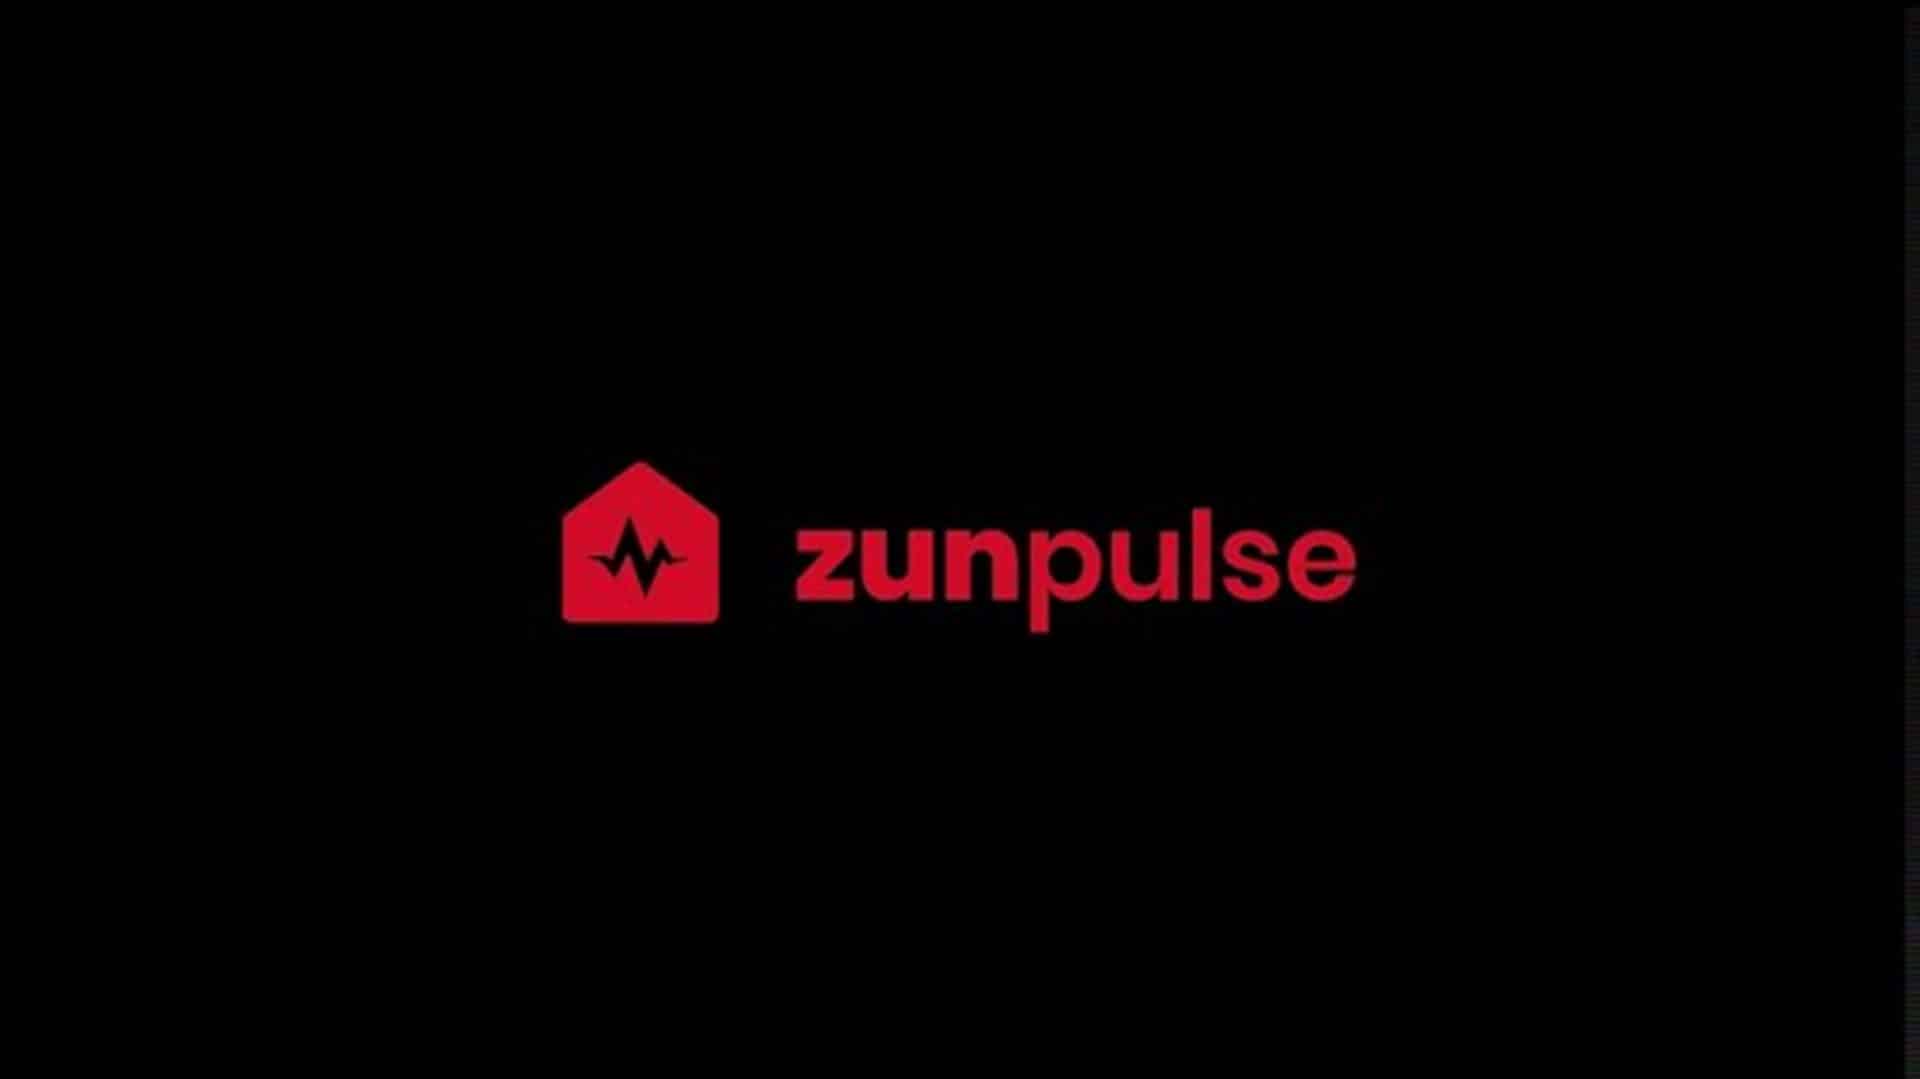 Zunpulse expands its IoT Smart Appliances Product Portfolio with a new range of smart products